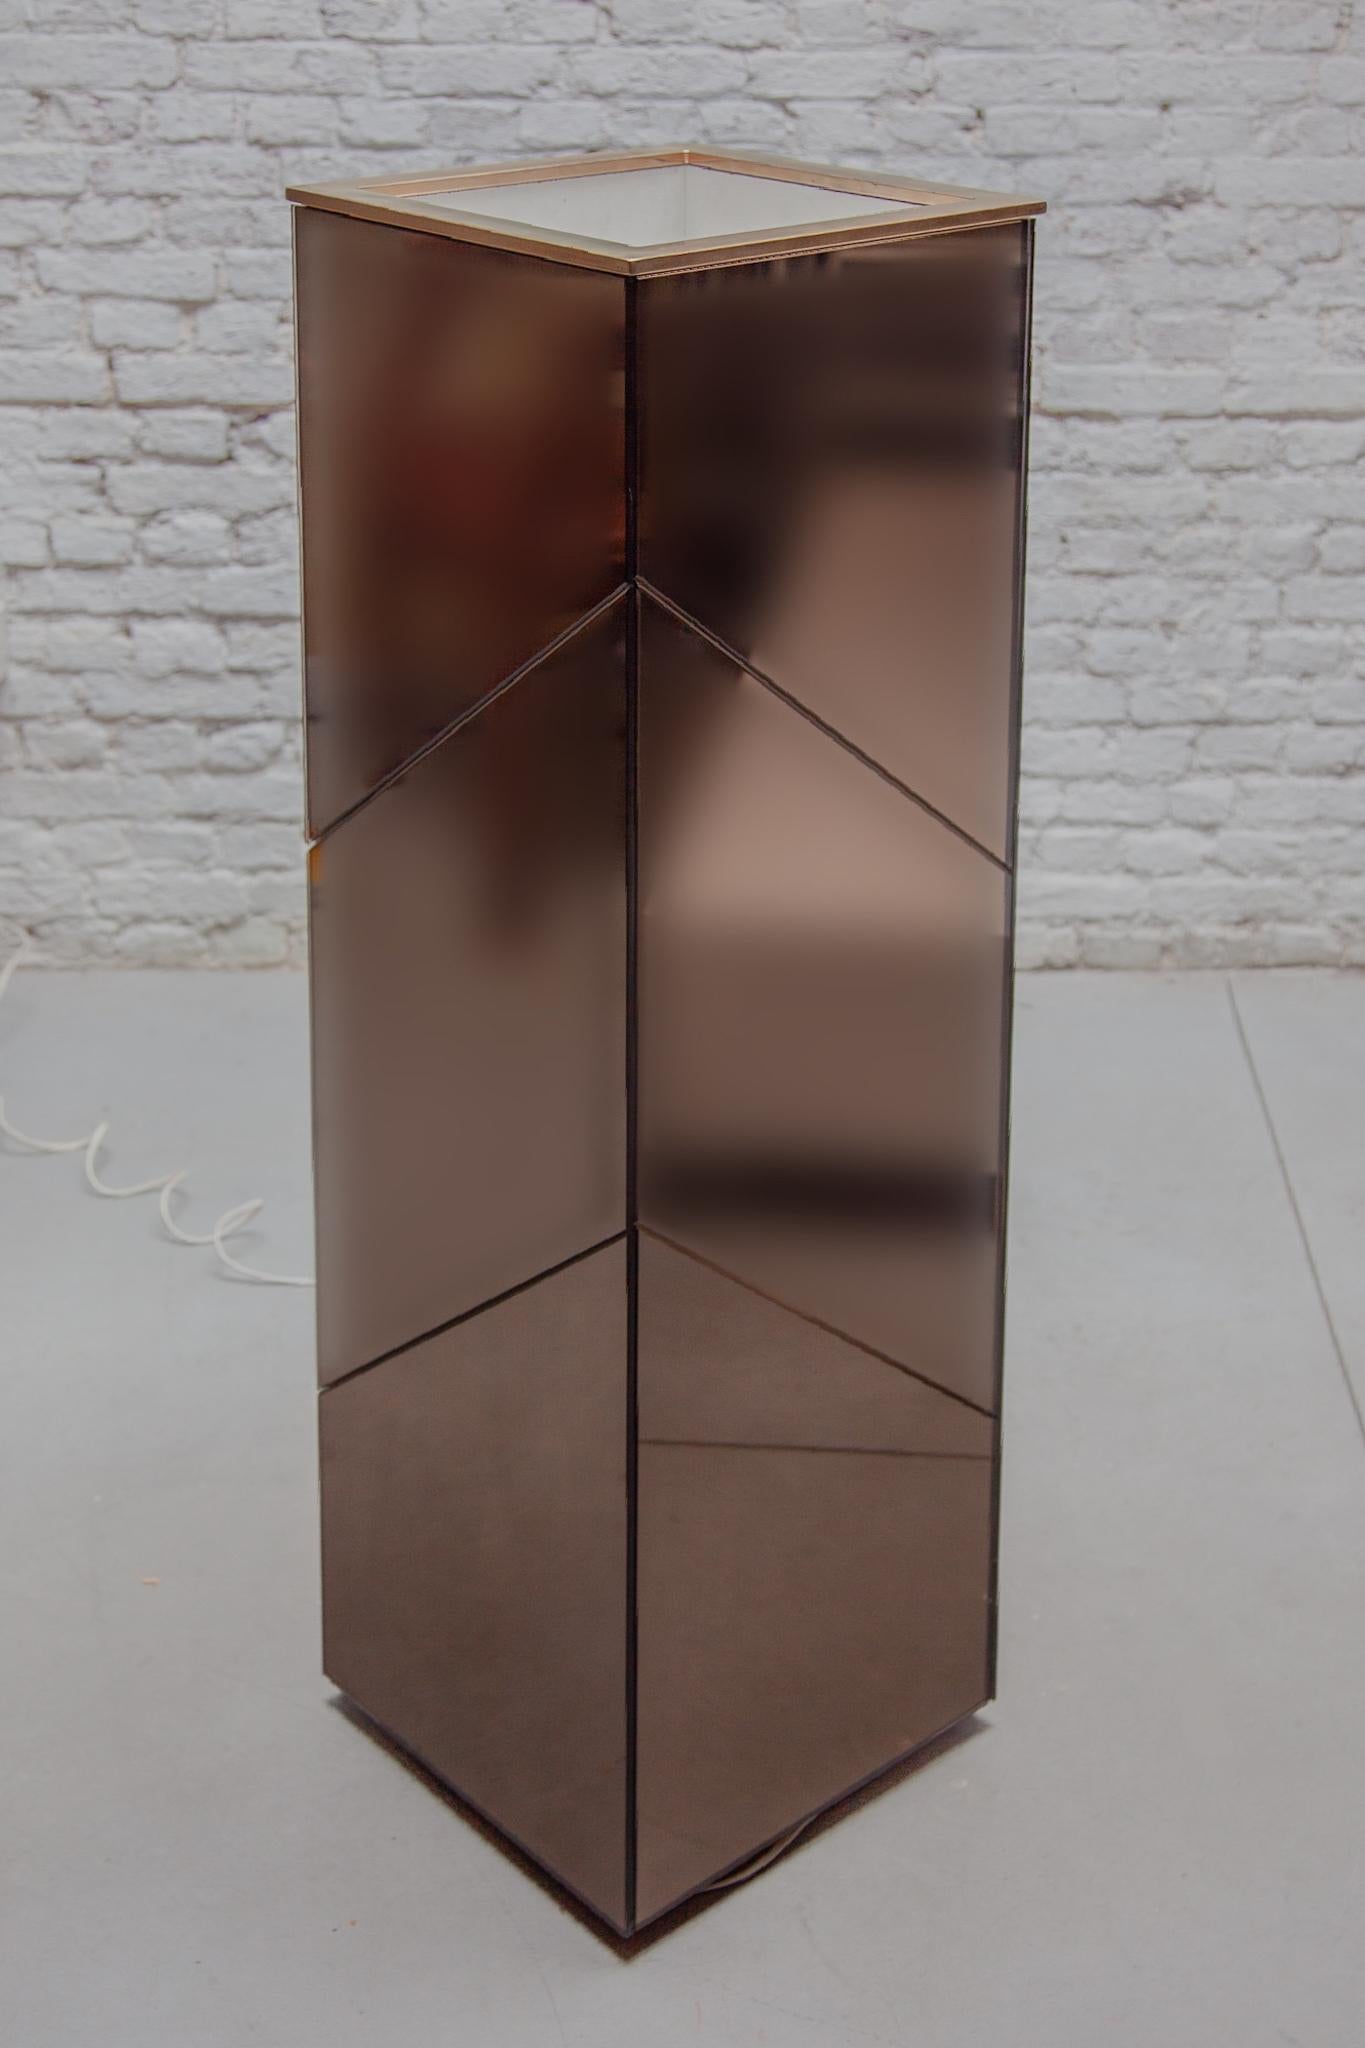 Smoked Mirrored Planter, Floor Lamp 1970s designed by Belgo chrome For Sale 1